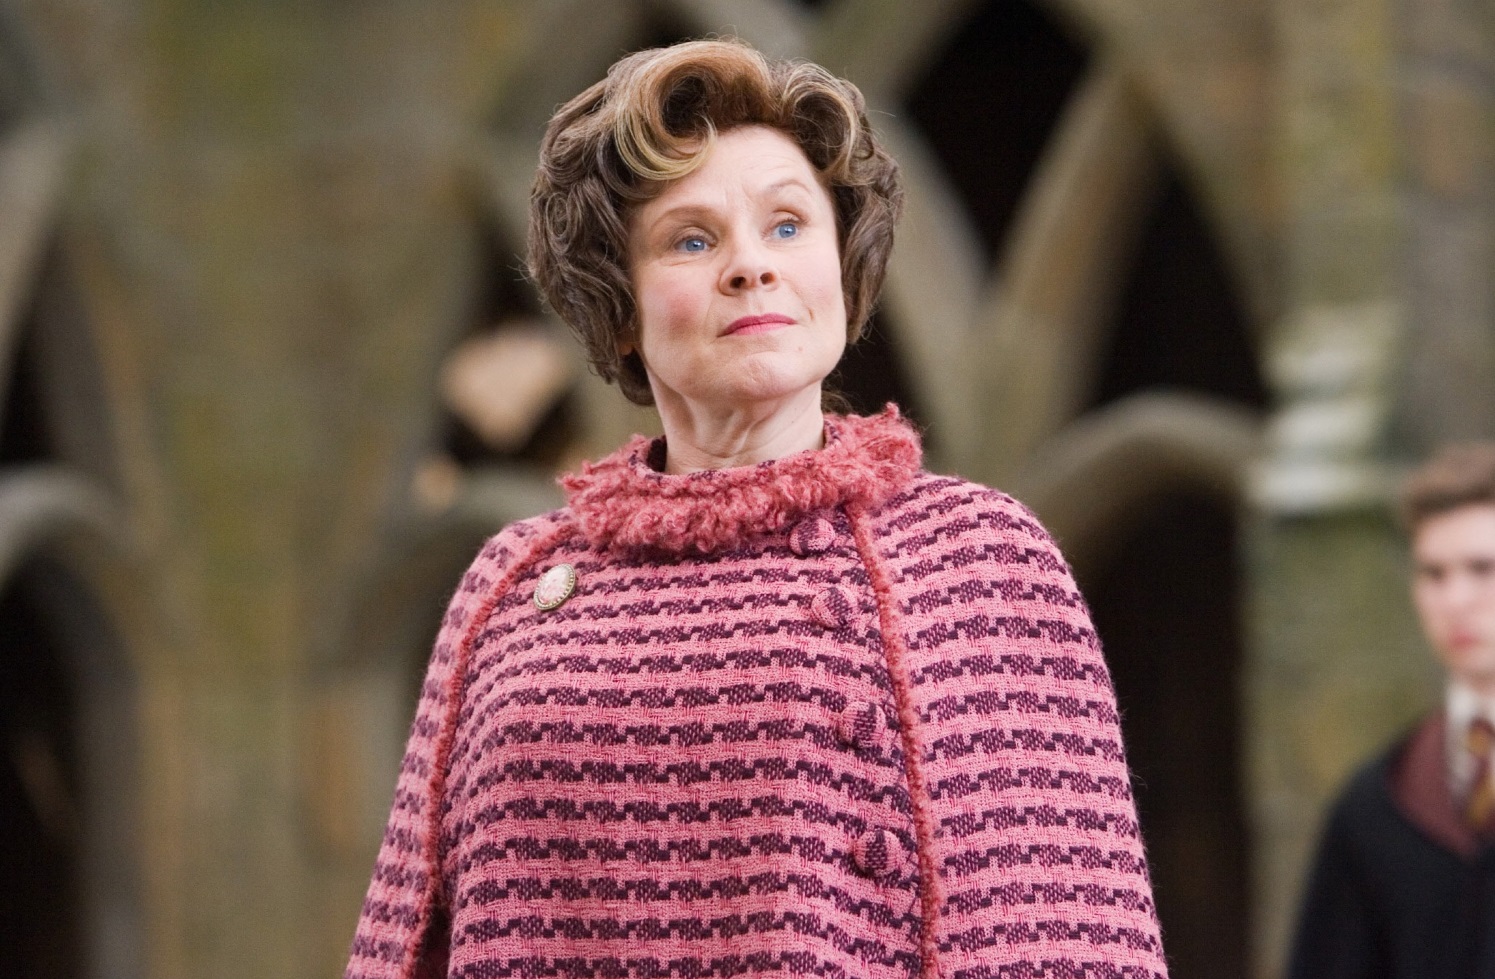 Imelda Staunton as Dolores Umbridge in Harry Potter and the Order of the Ph...